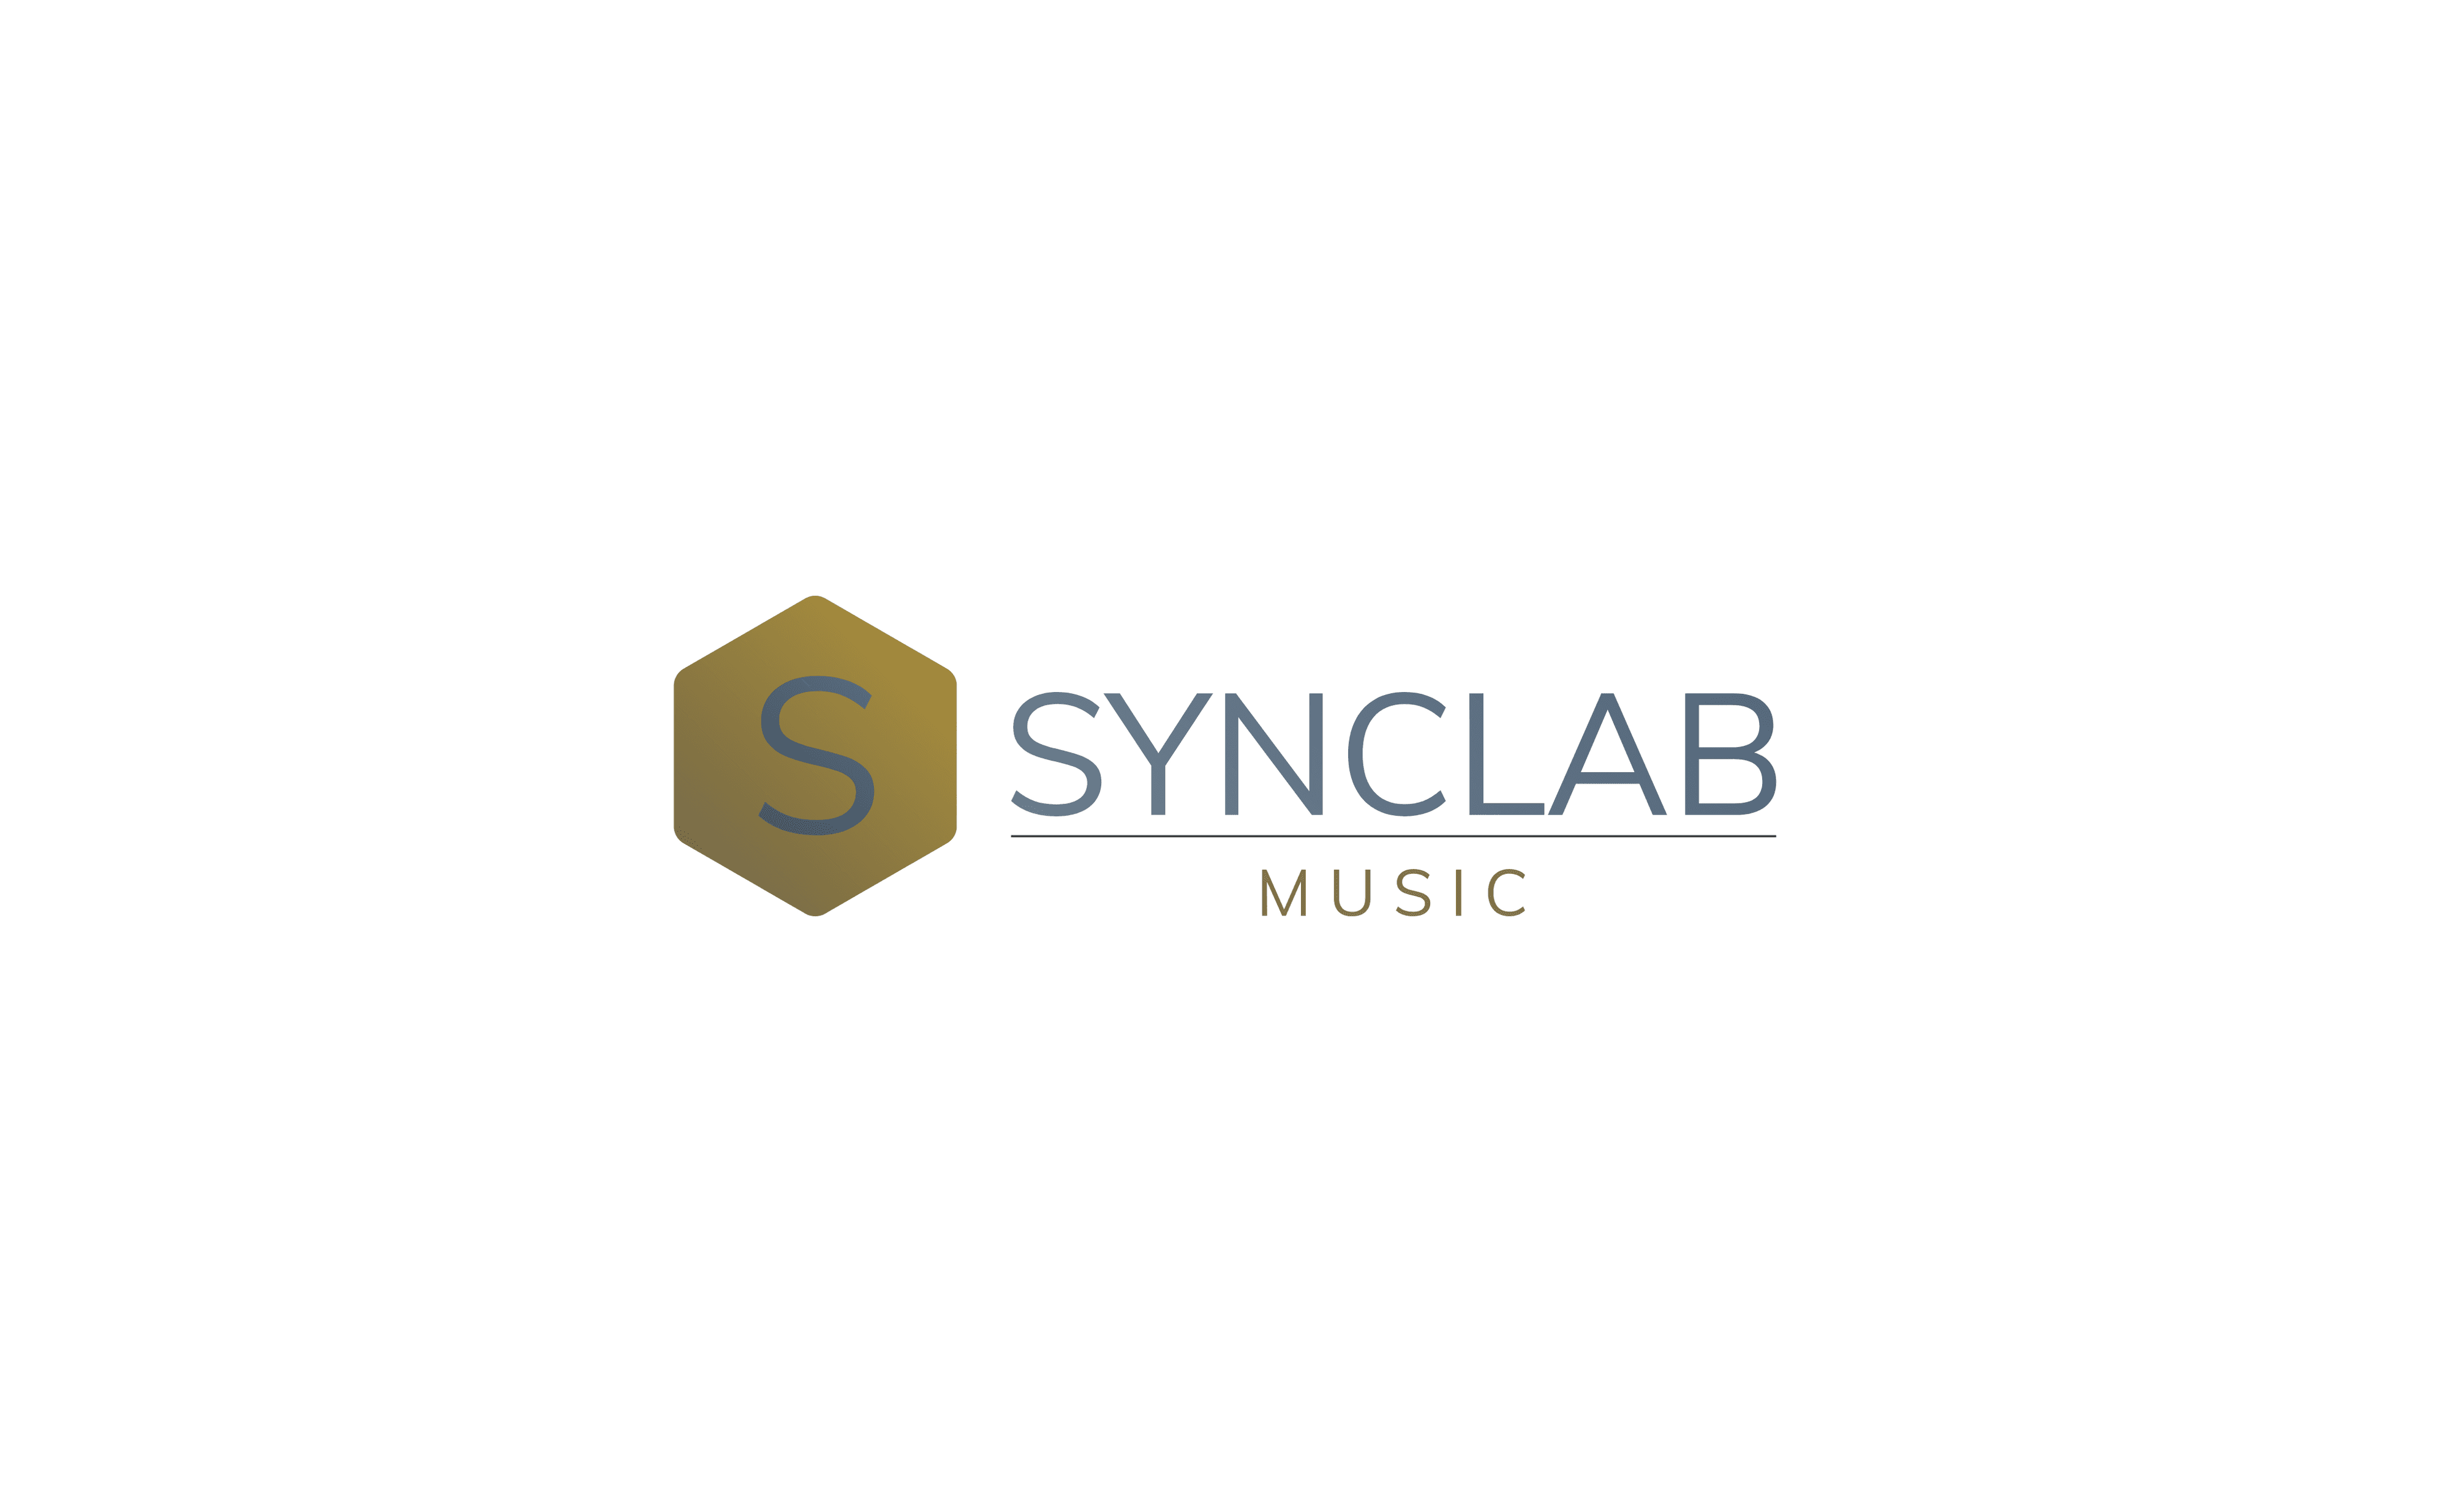 Synclab_Music 橫幅